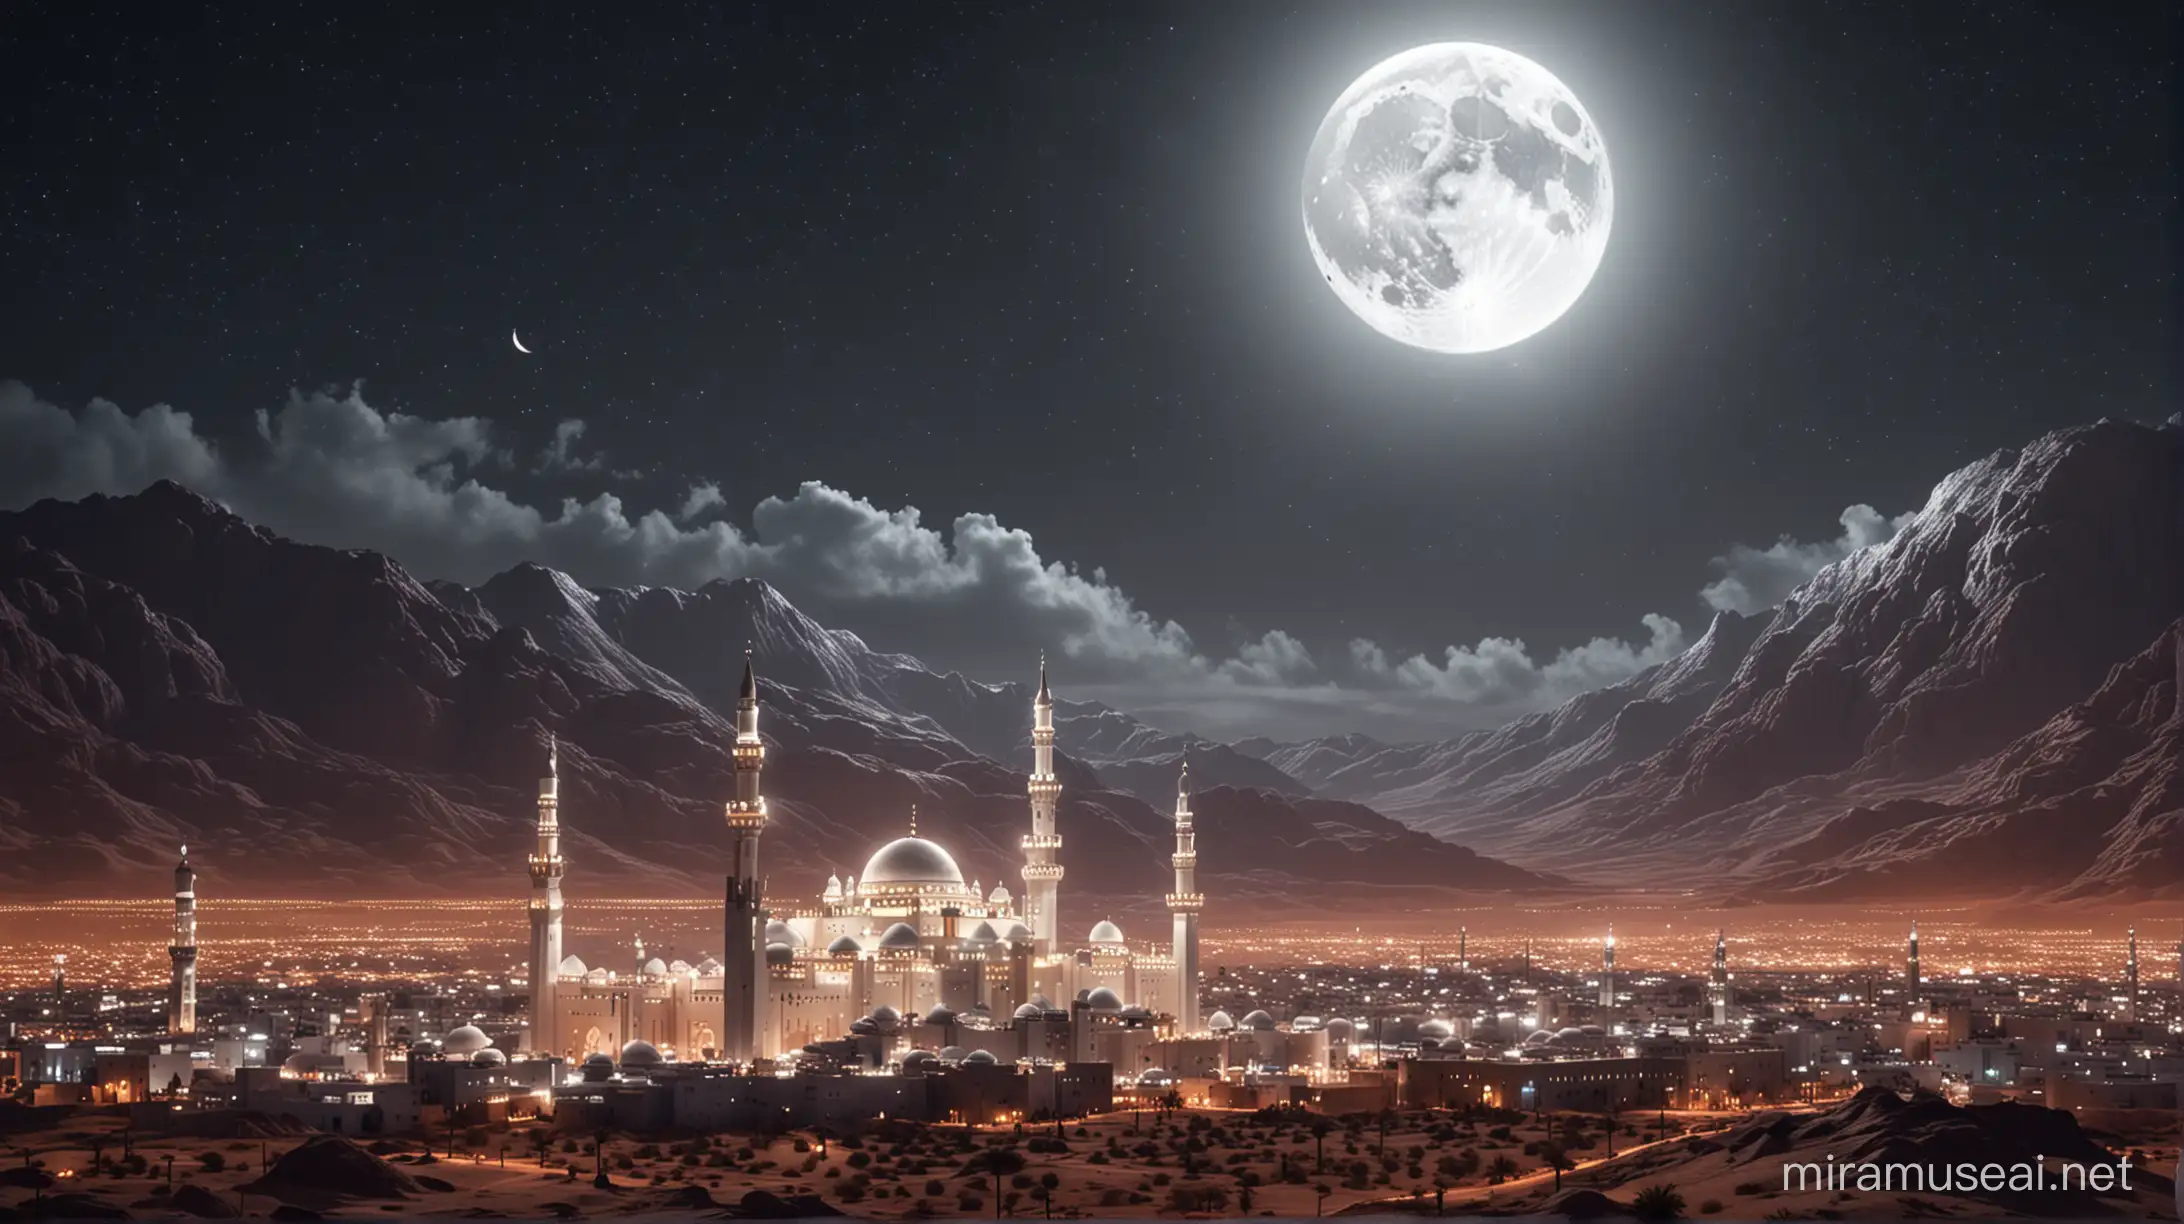 A Realistic landscape image of  the Muslims in Madinah mosque, white neon and huge neon lights of moon inside the mosque, its color shadow on the arab old houses in the desert, Madinah in the year 632 A.D. ,  Summer time, ultra-high quality, detailed, 8K, vector illustration. Sad Atmospheric and cinematic. A dark white smoke rose from the Mosque and spread in the air. A moon
in sky shining its reflections in the Realistic desert mountains.
All overall dark white image theme.
Very big lights and lots of white neon lights.
The neon lights in the image should be very bright in the dark throughout the image.
Very large and bright neon lamps in the structure.
Shades of white throughout the image.
3D.